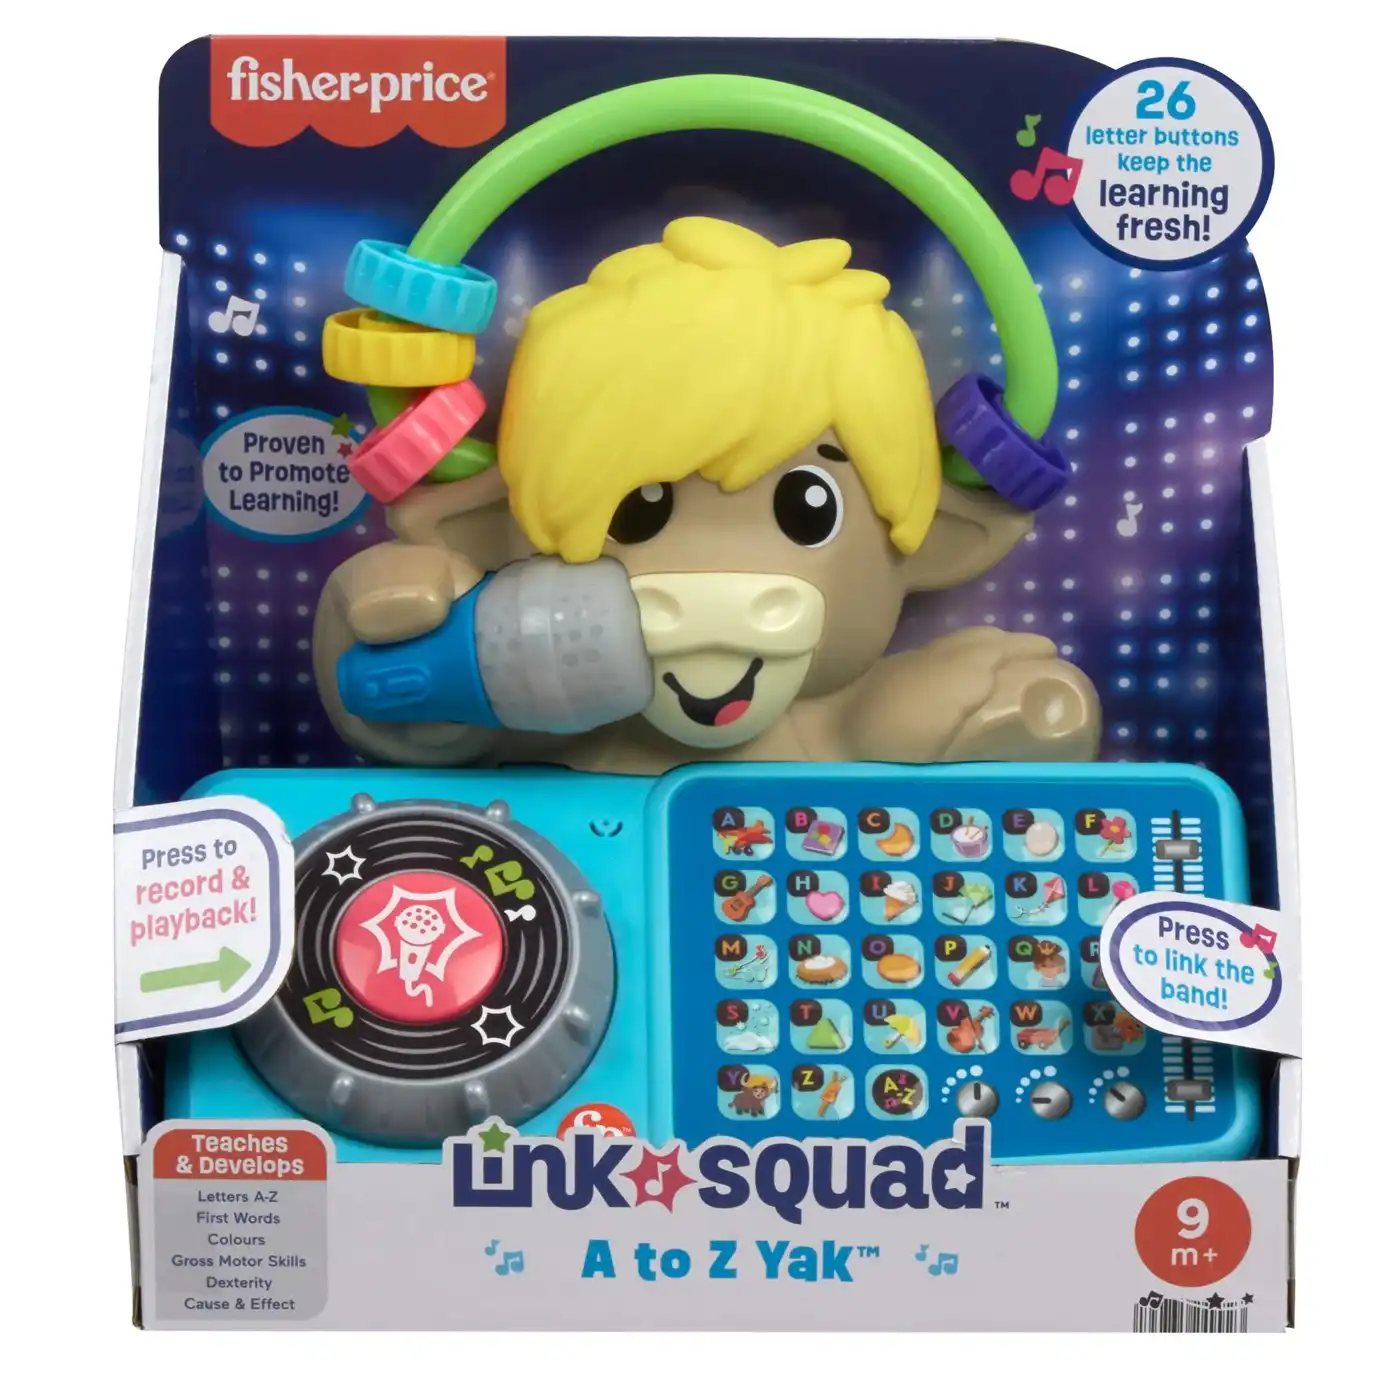 Fisher-Price Link Squad A-to-Z Yak